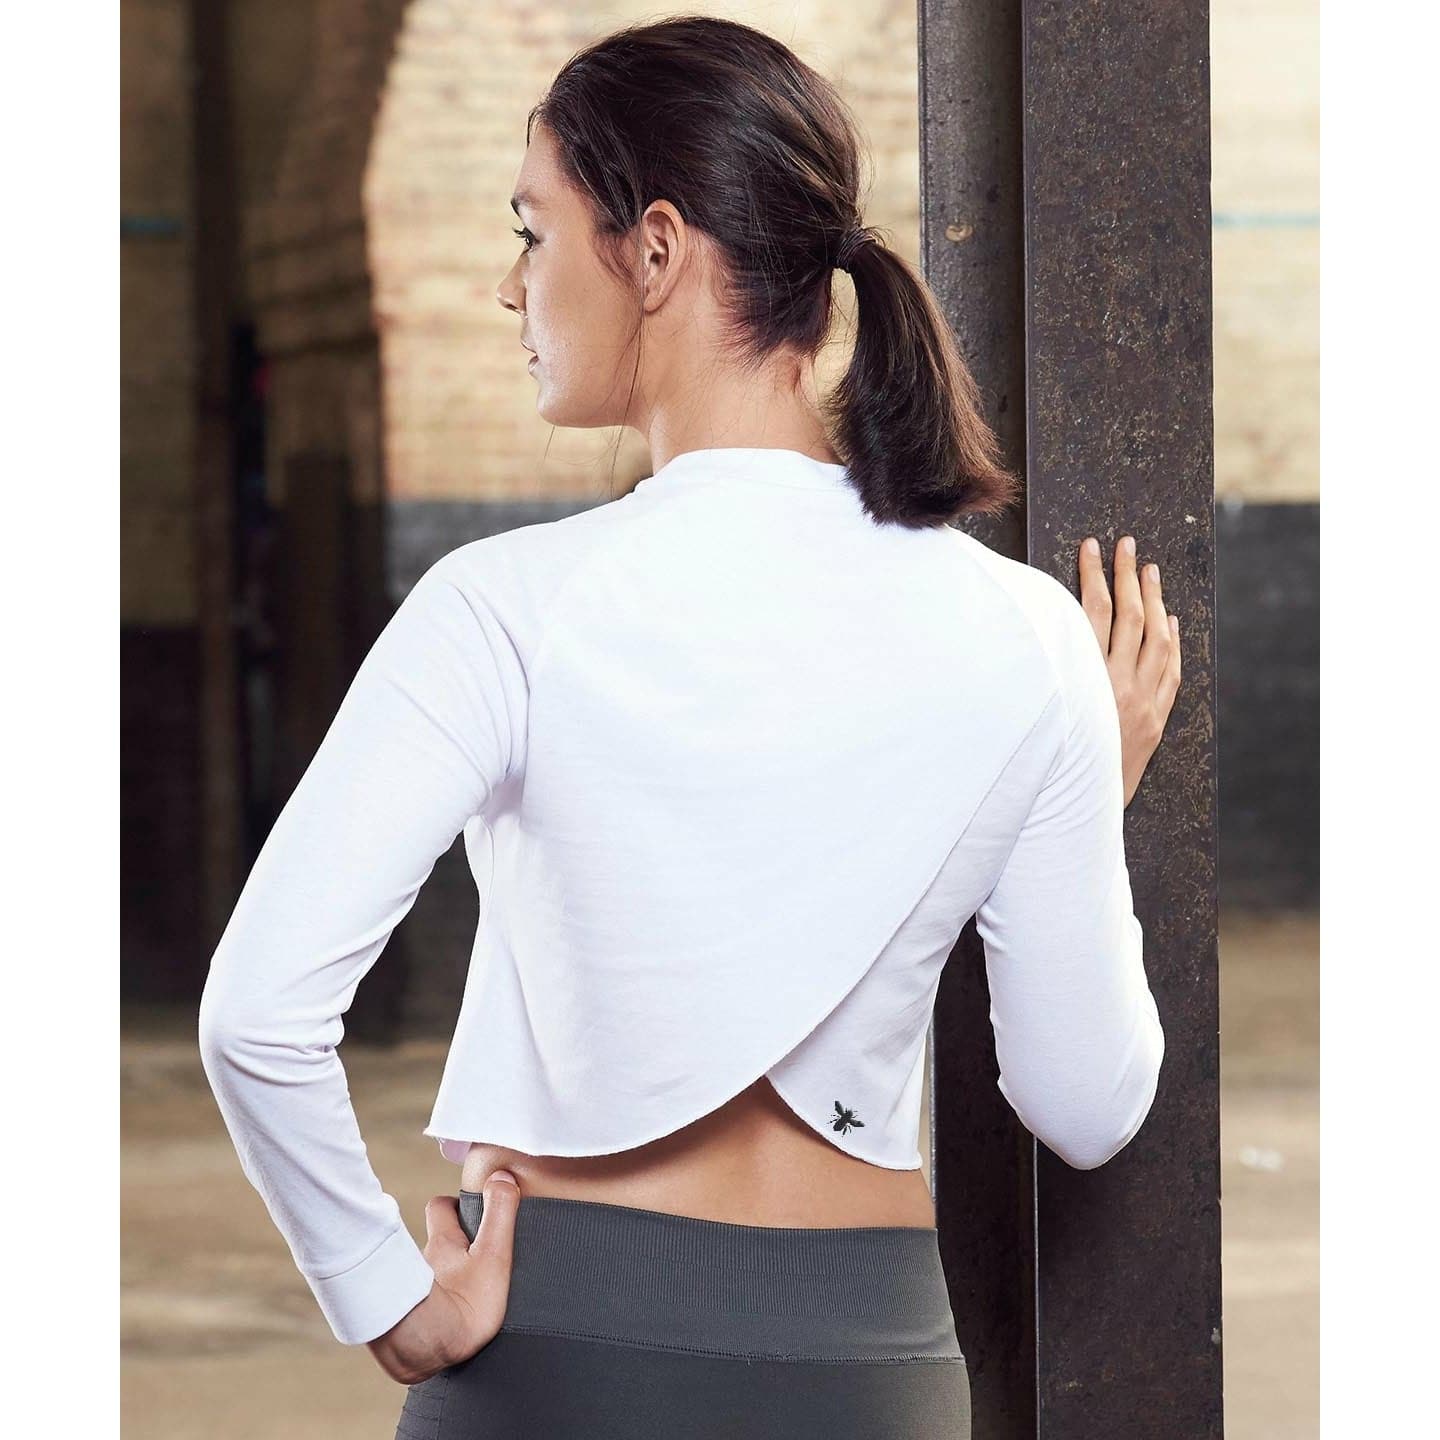 IBBY - Ladies' Cross Back Technical Top.